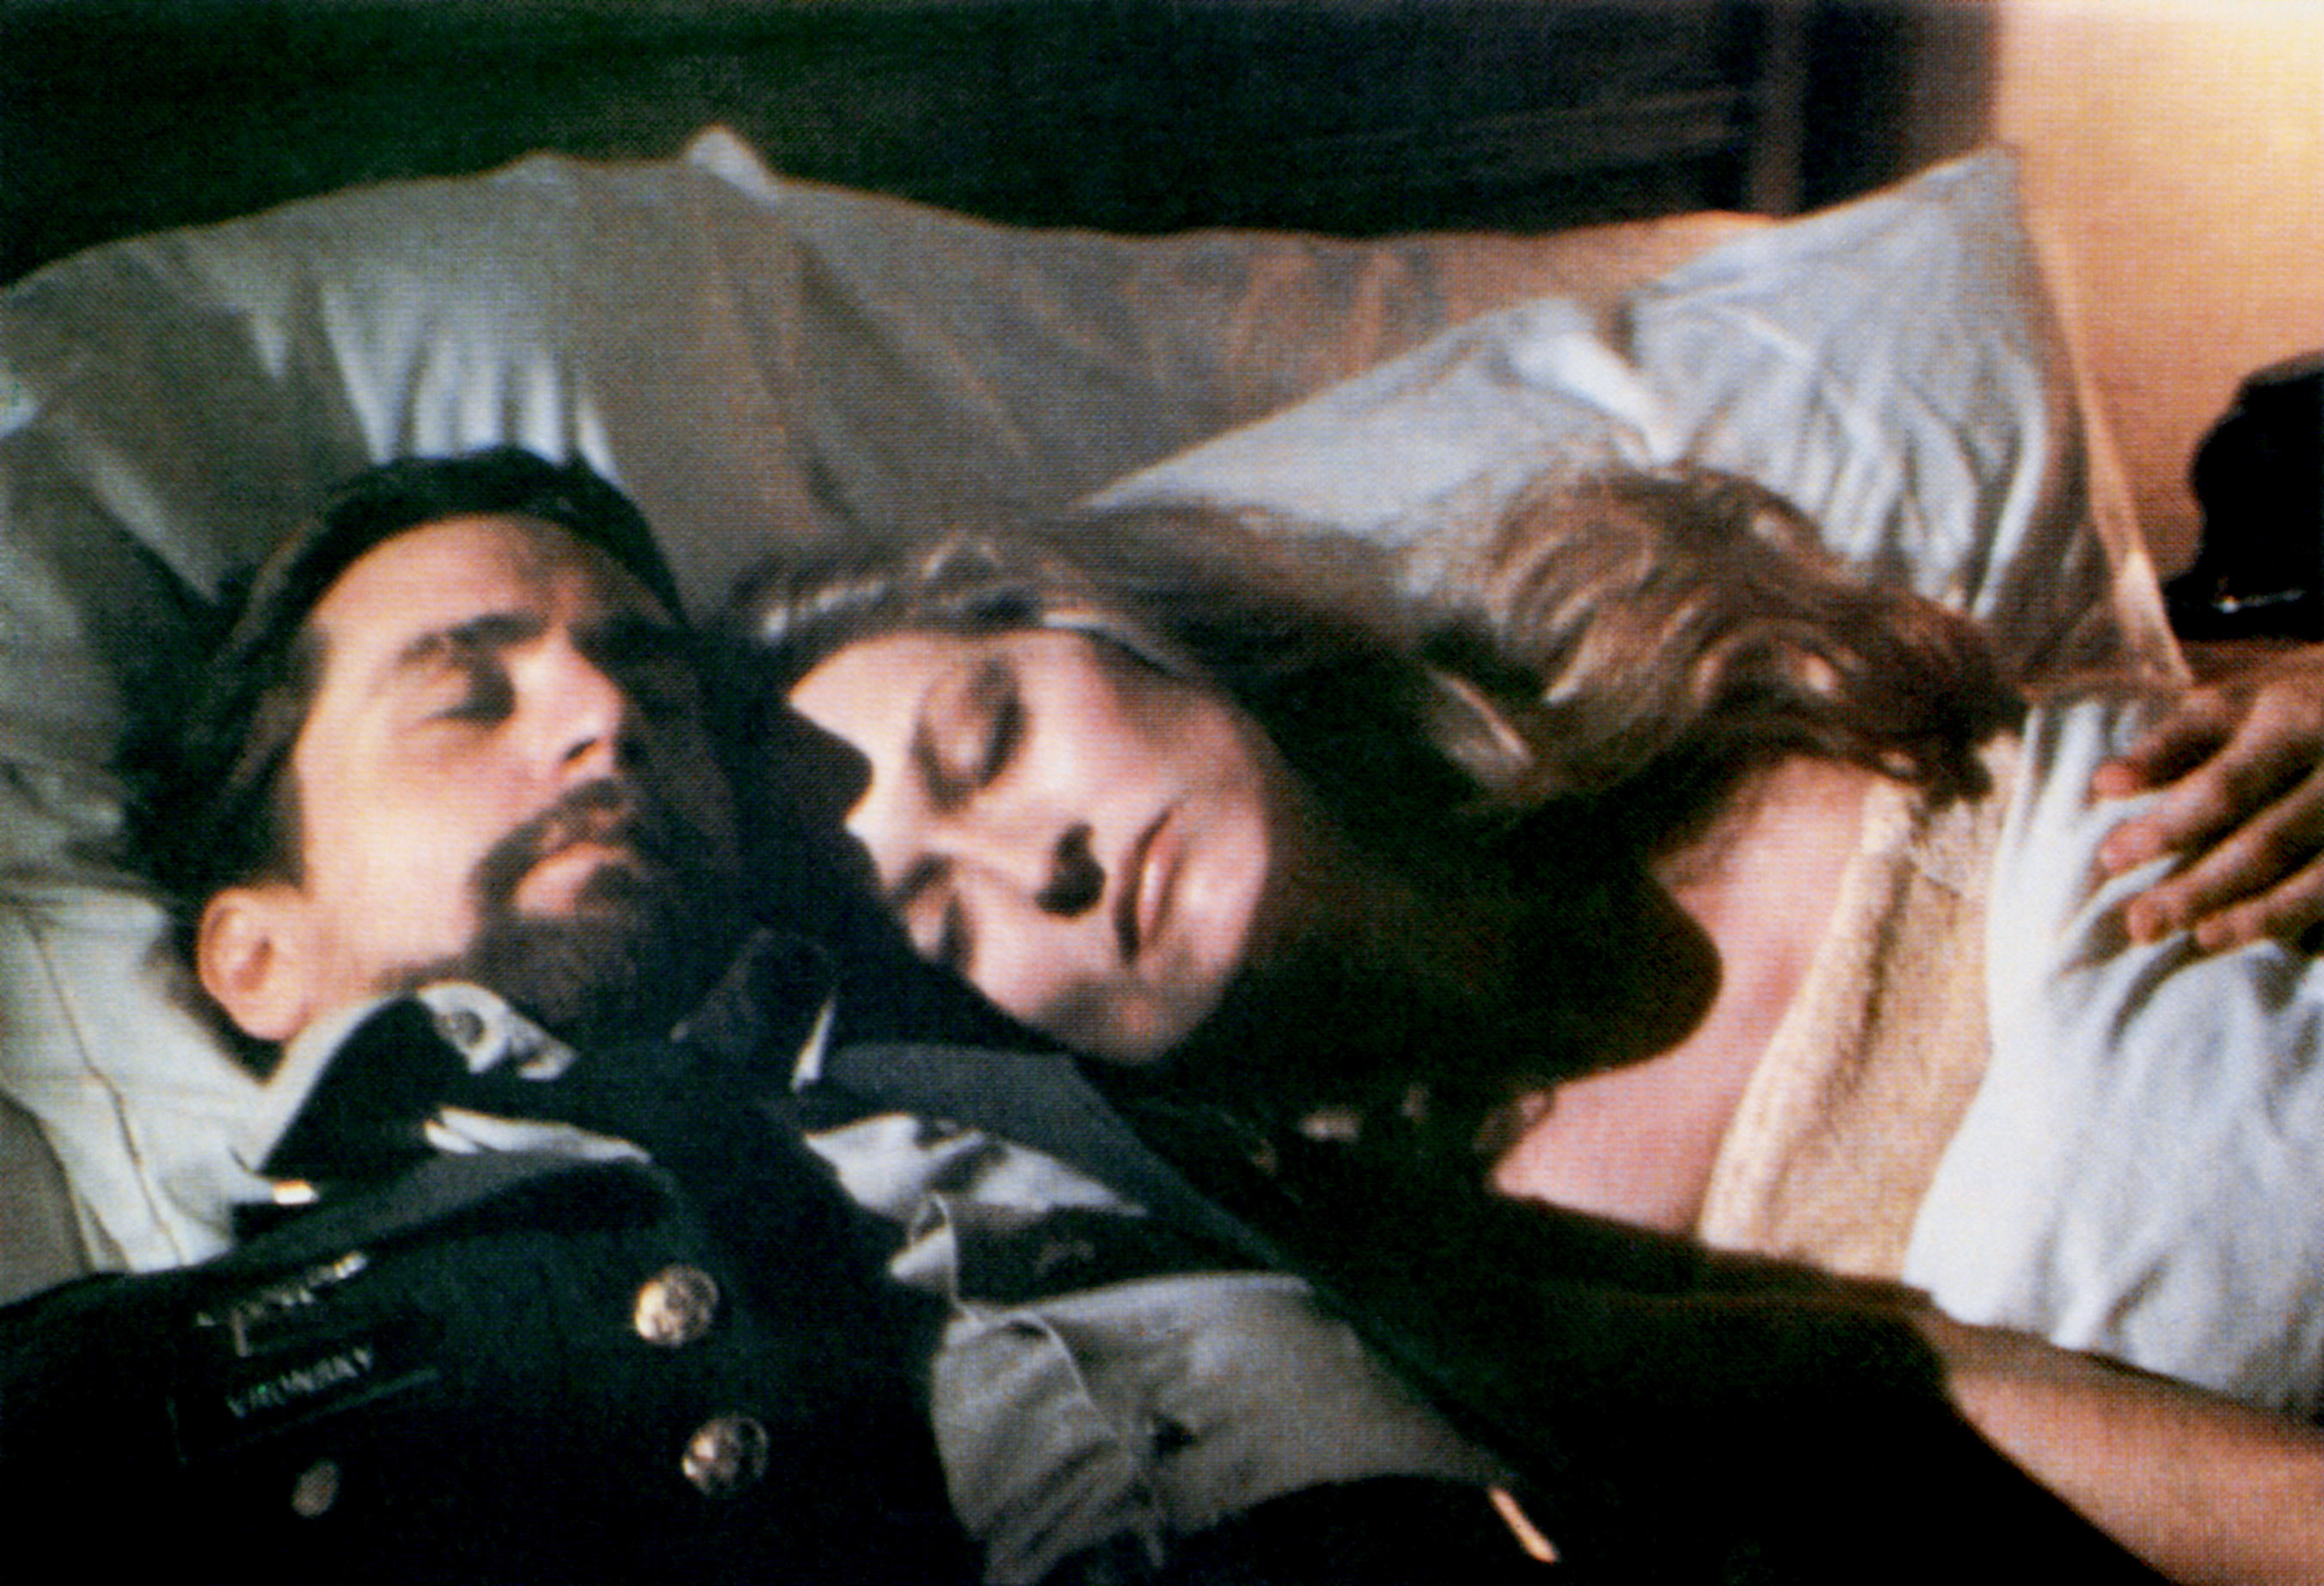 Robert DeNiro and Meryl Streep lay in a bed together